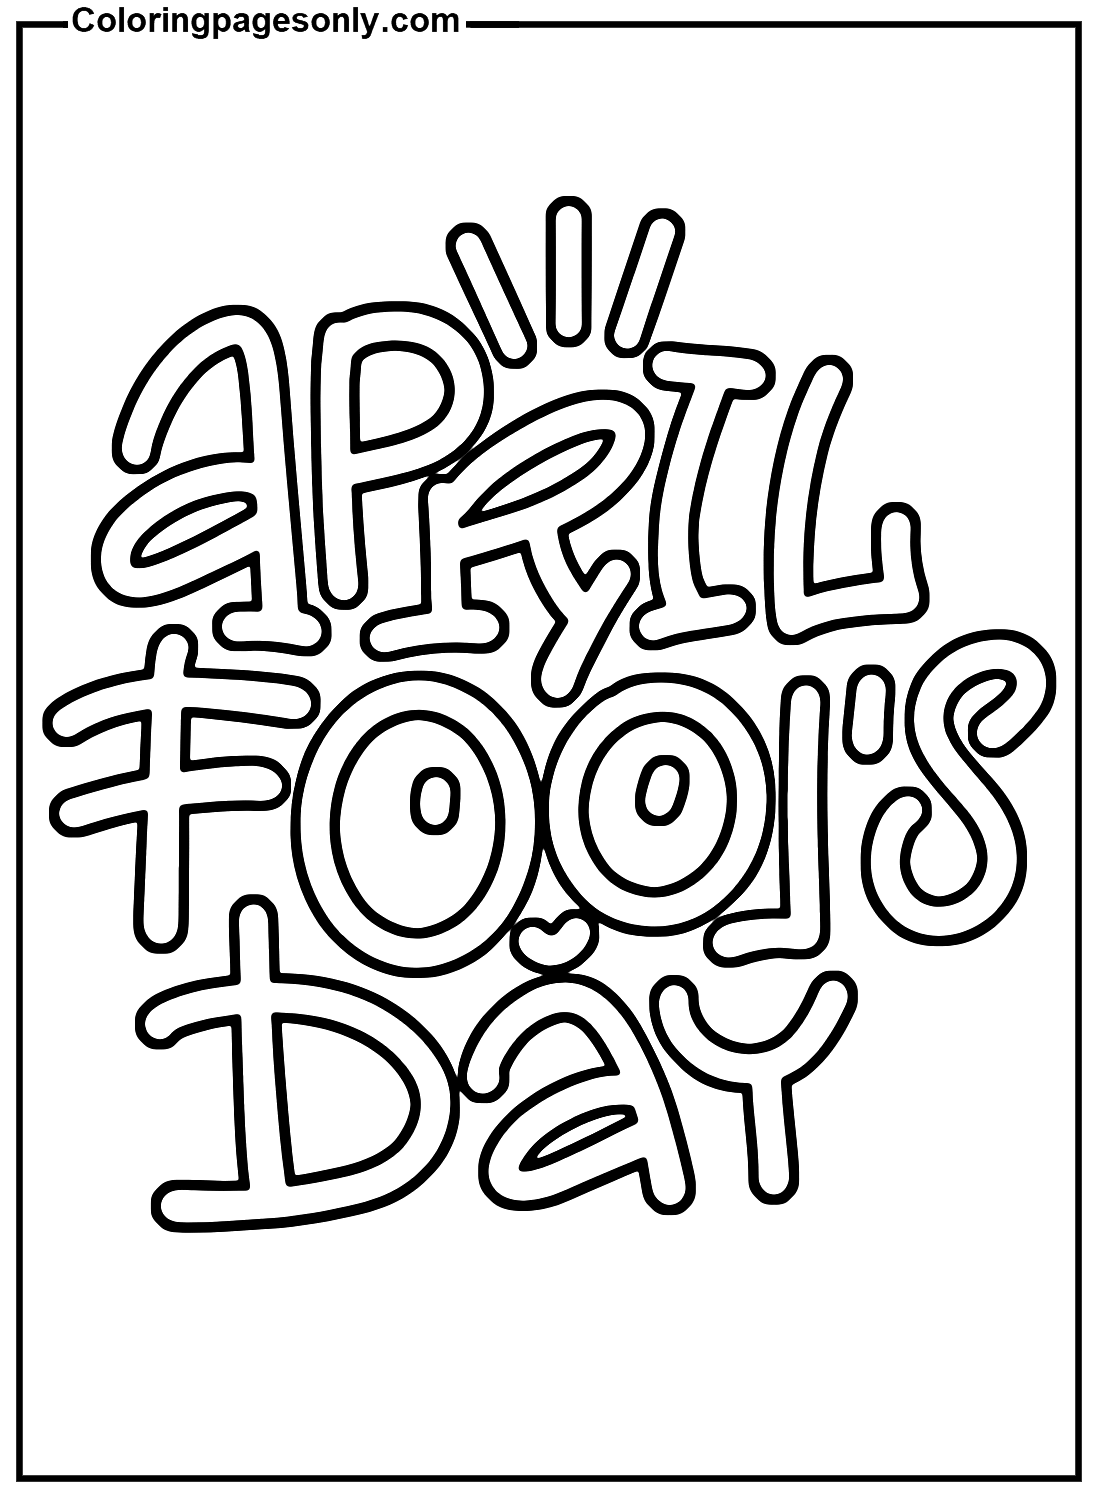 April Fools' Day Images Coloring Pages